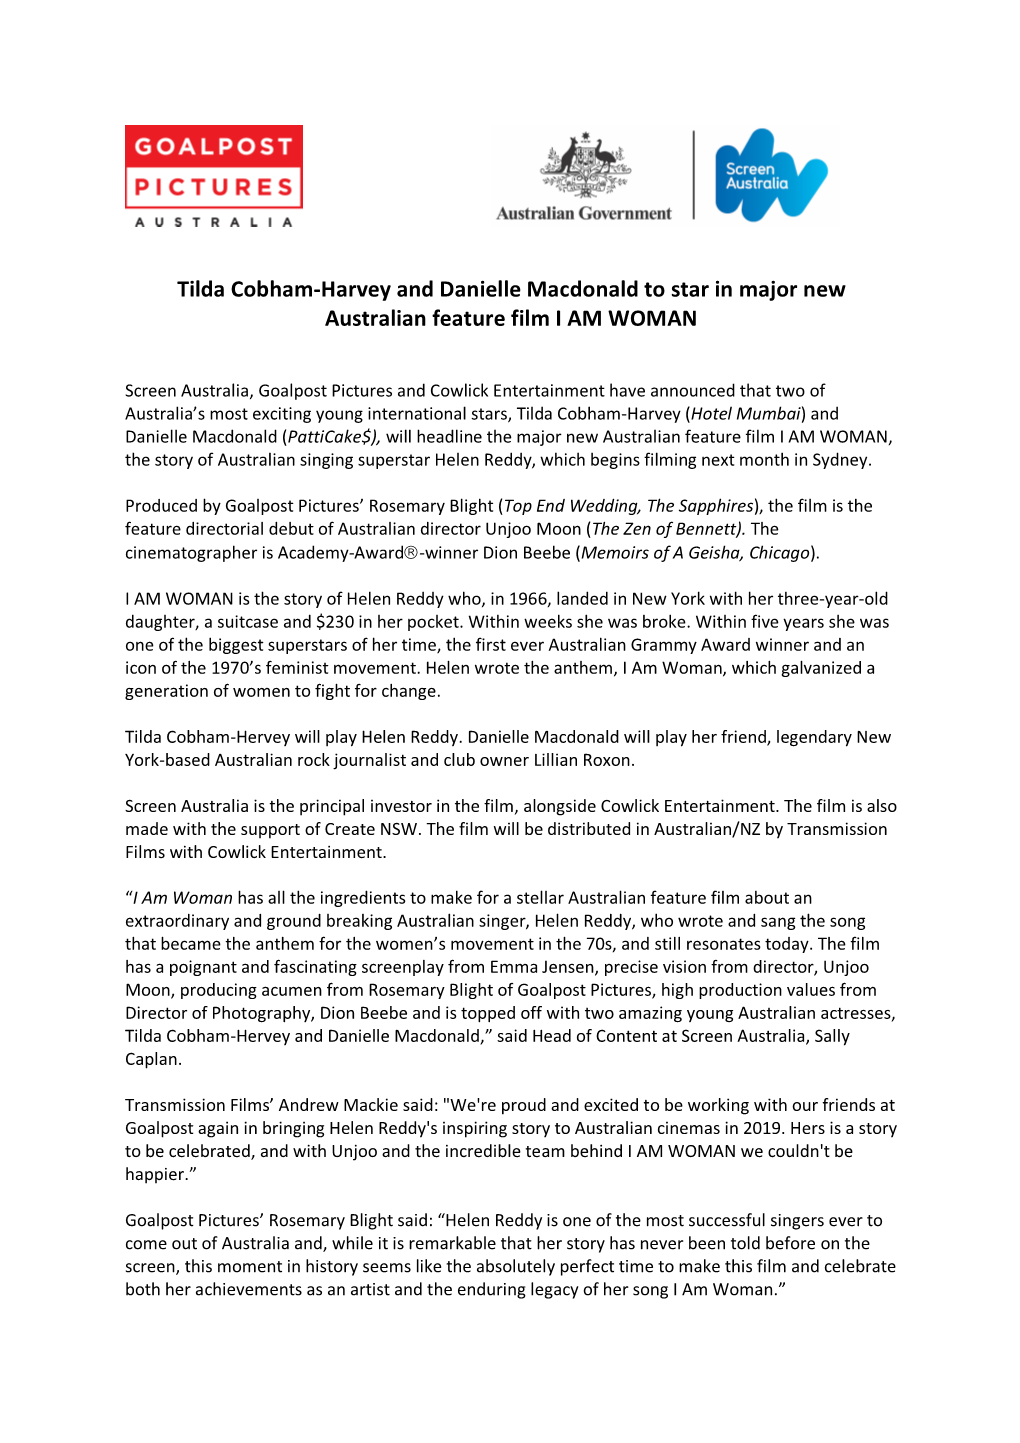 Media Release I Am Woman Announcement